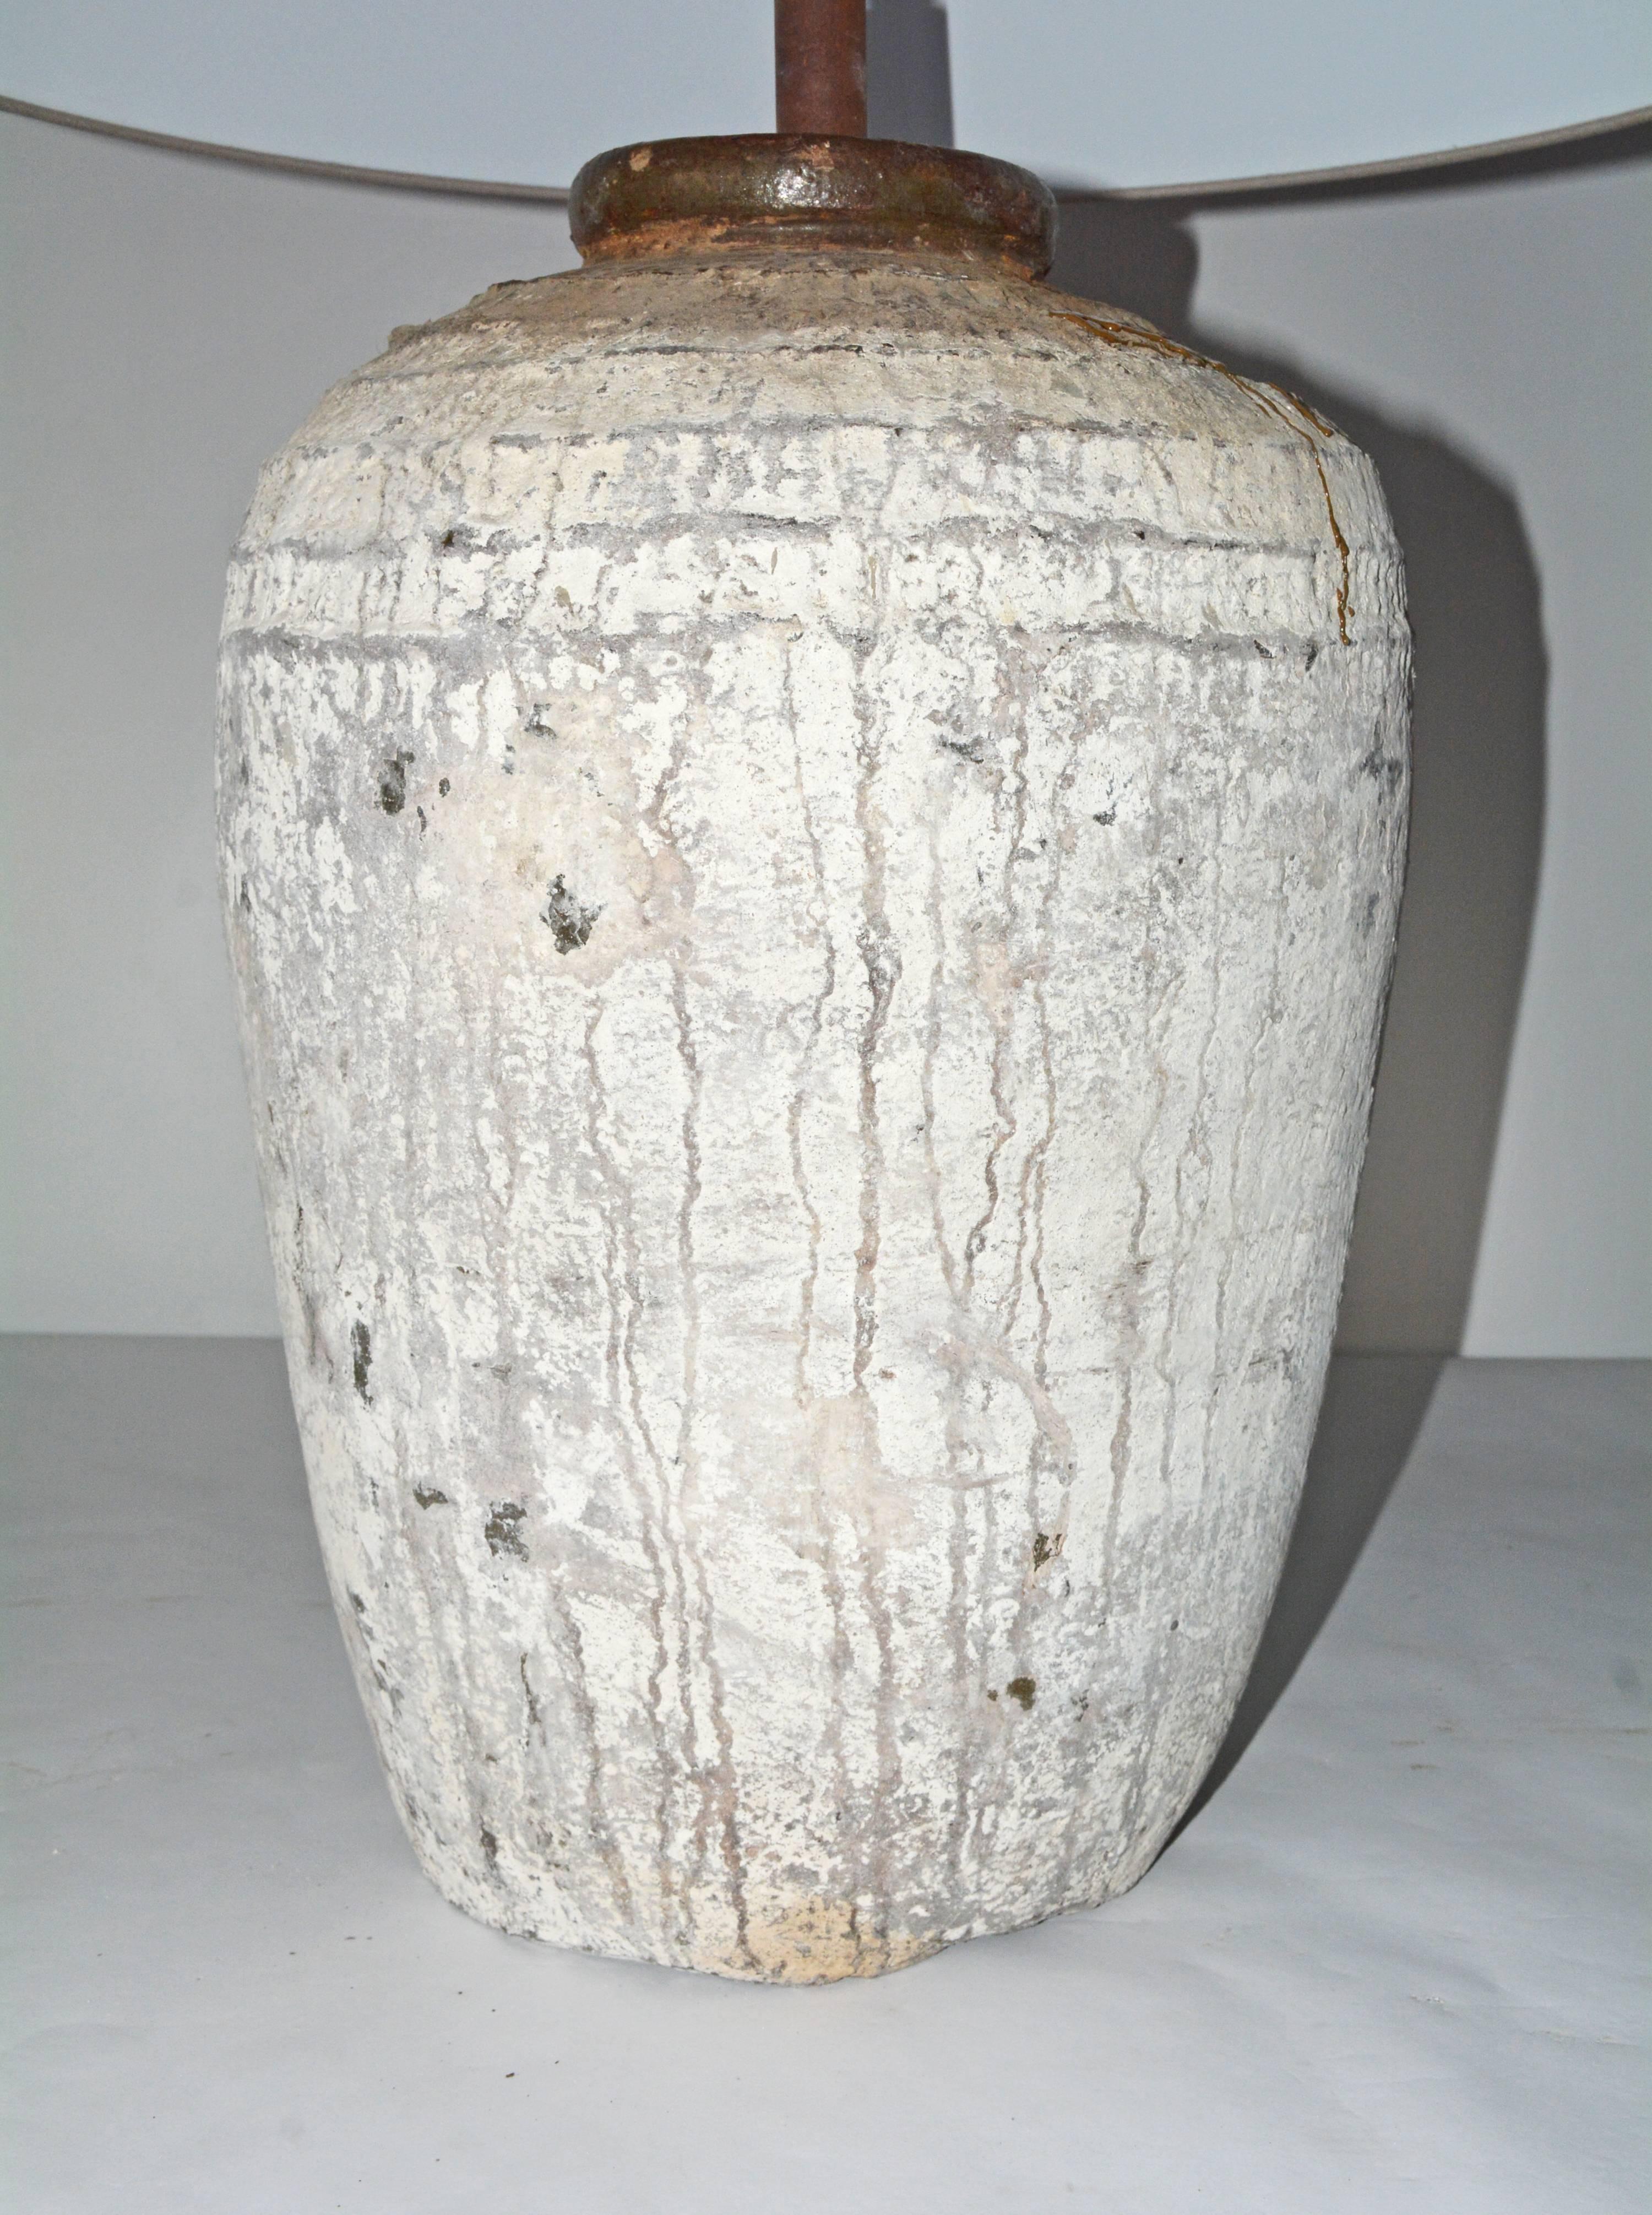 The large white/grey lamp base is a rustic antique Chinese clay jar. Chinese lettering is found at the bottom of one side. The shade is made of taupe cross-hatch Belgium linen. En relief bands circle the top of the jar. The lamp is wired for US